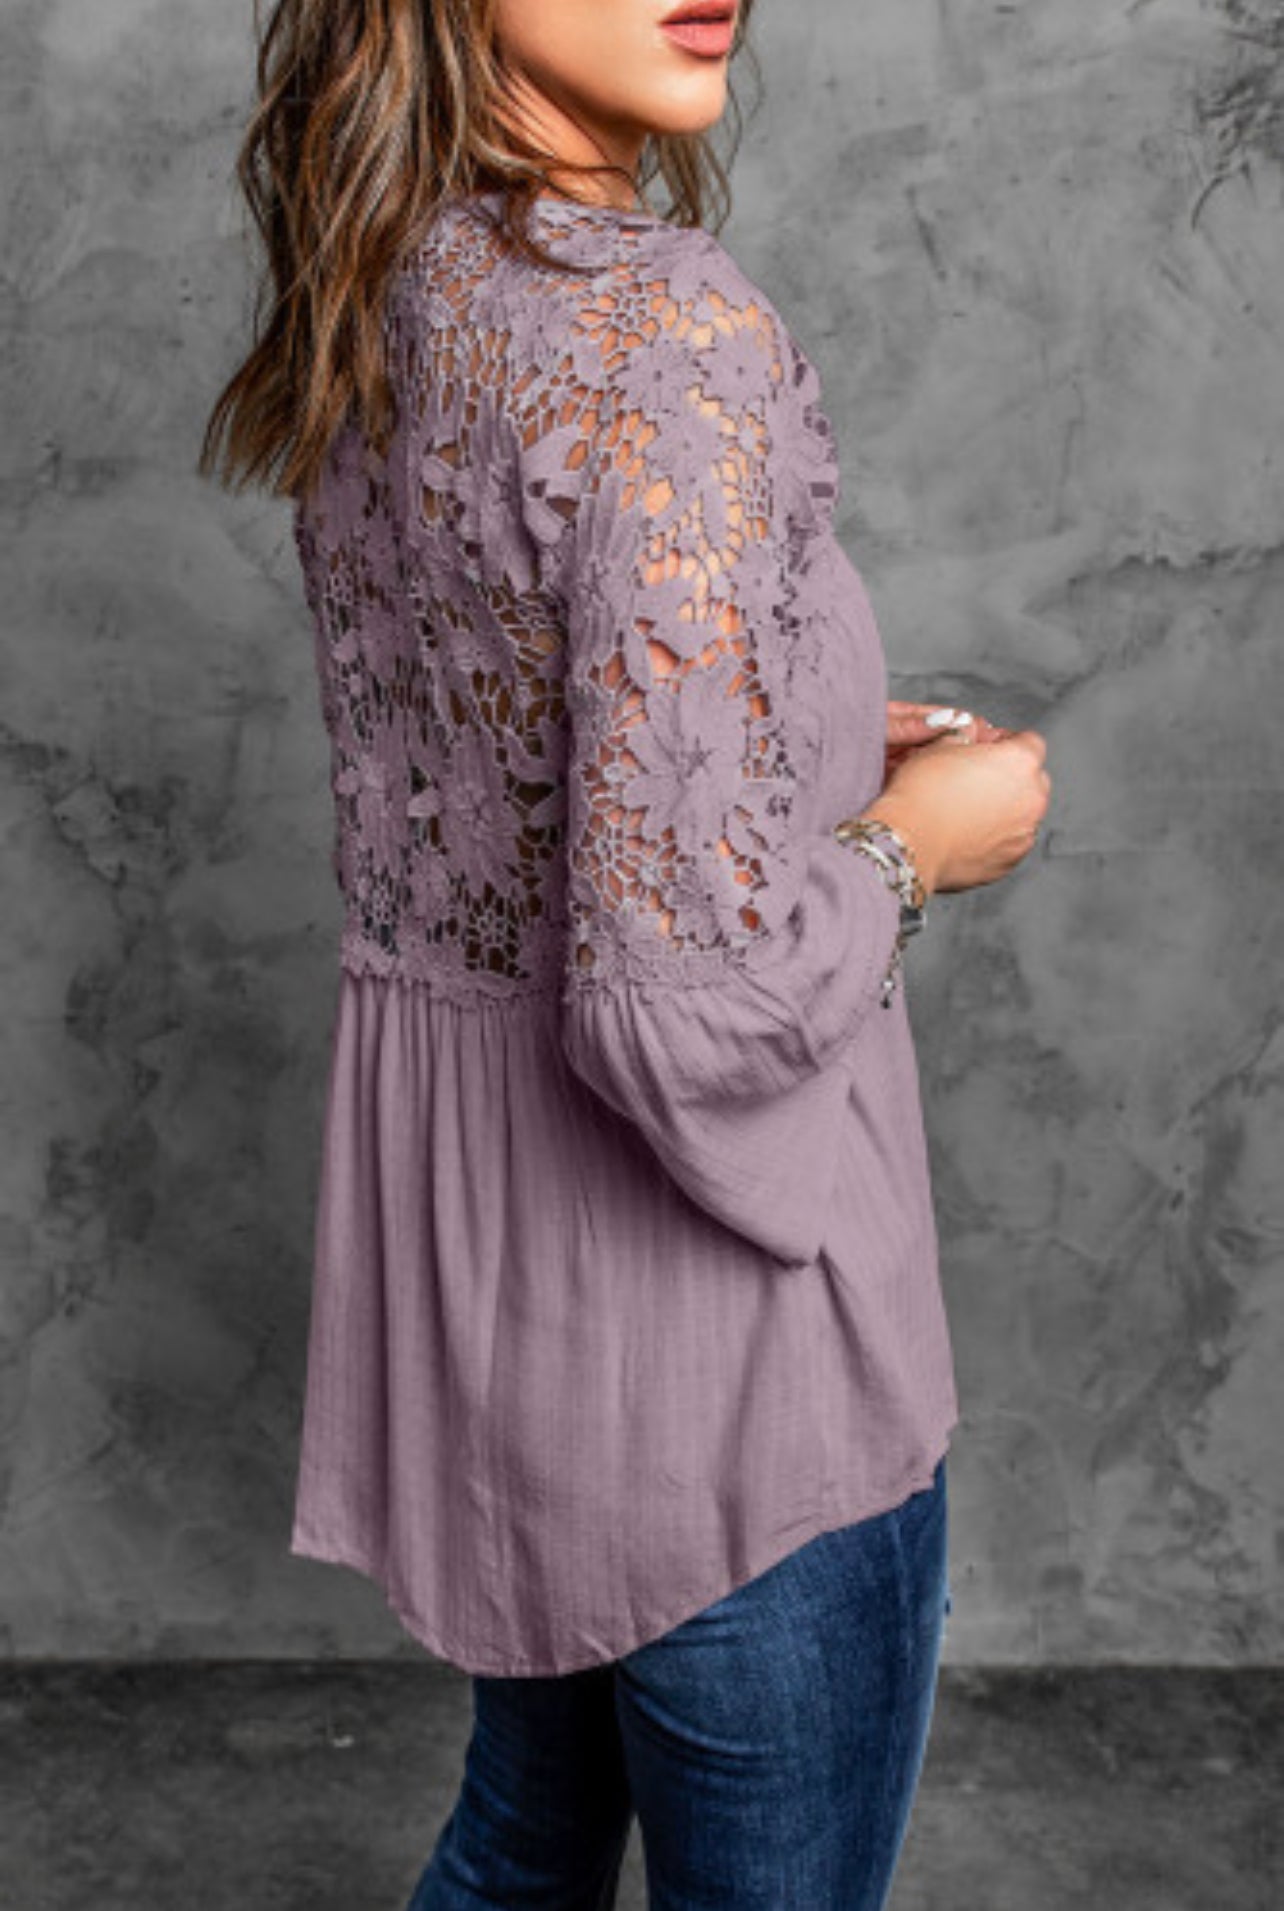 The Lacey Lavender top